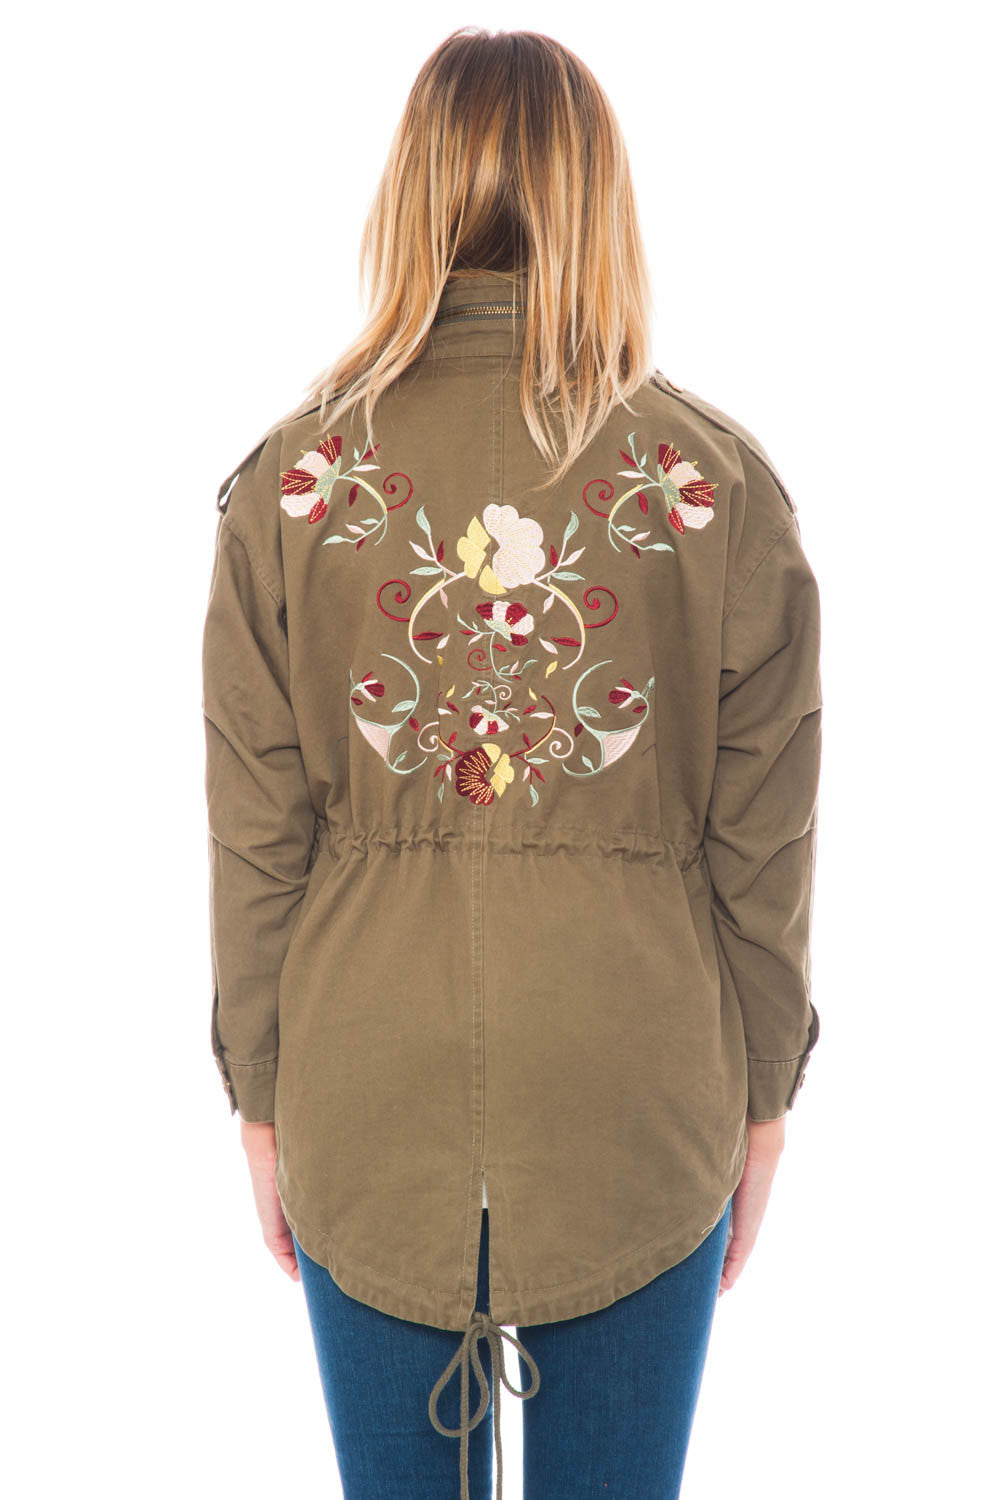 Jacket - Military Embroidered Jacket by En Creme